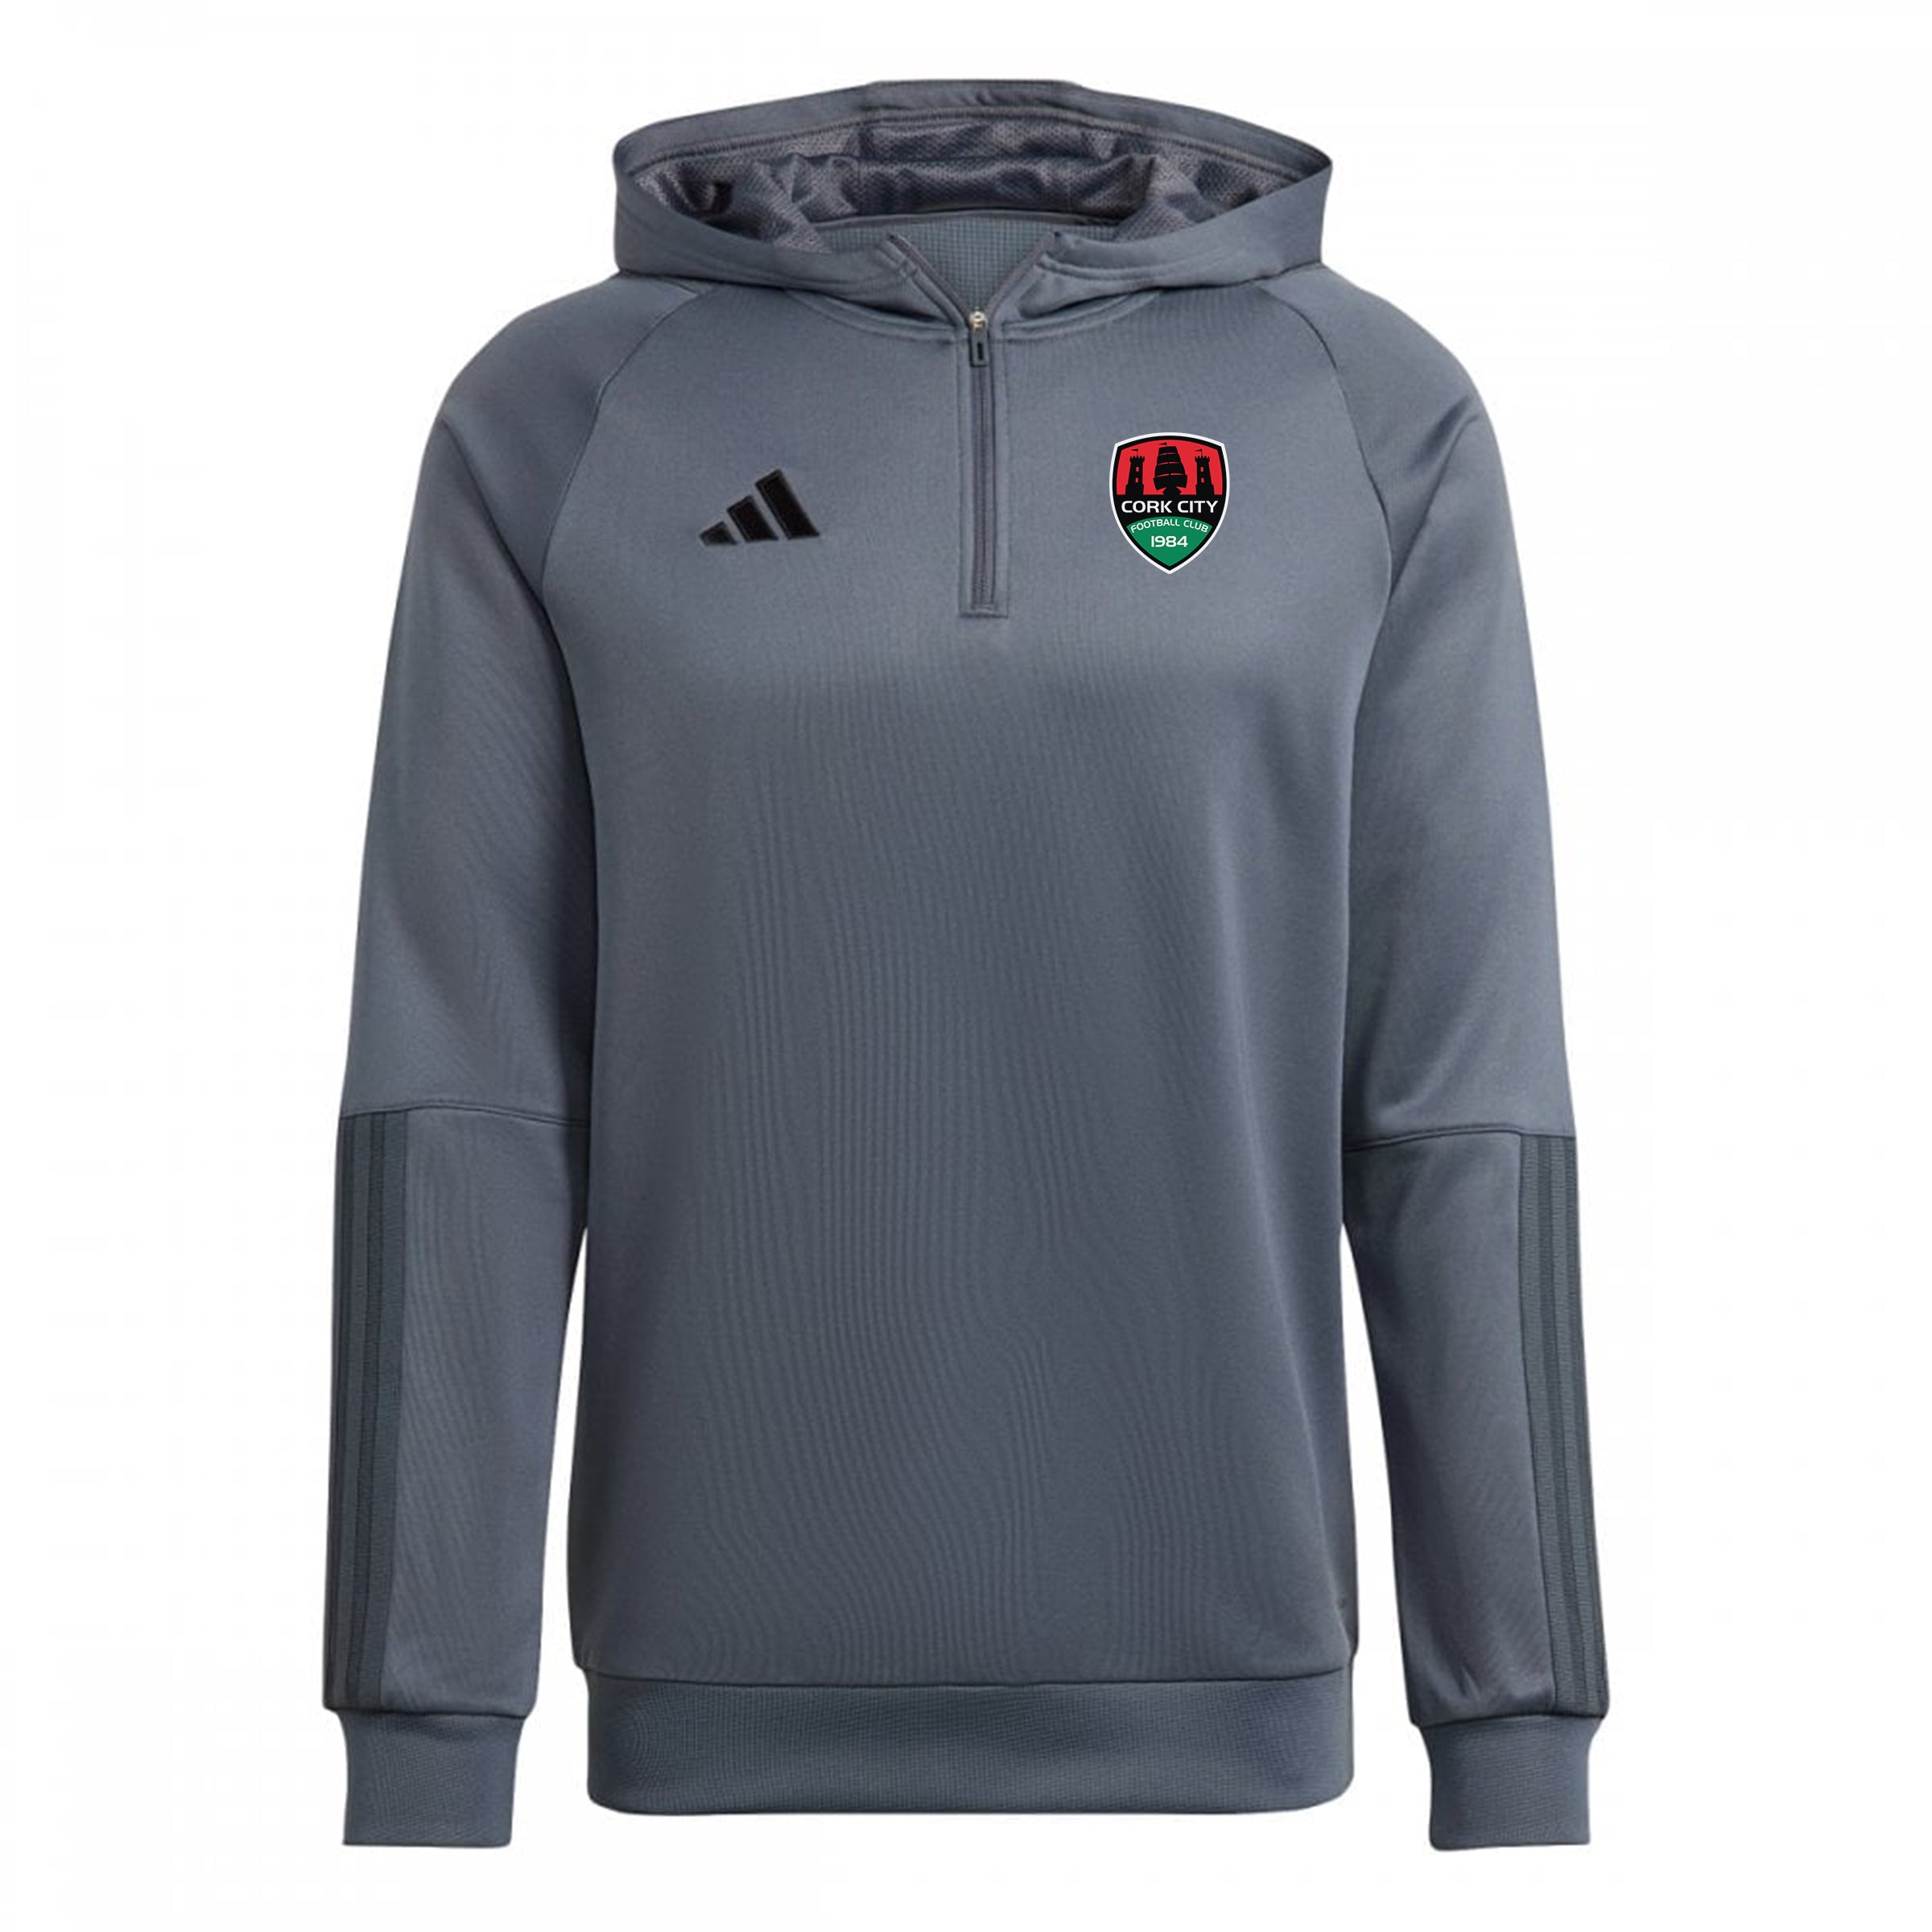 Adidas 23 Silver Grey Hooded Quarter Zip Training Top - Adult,